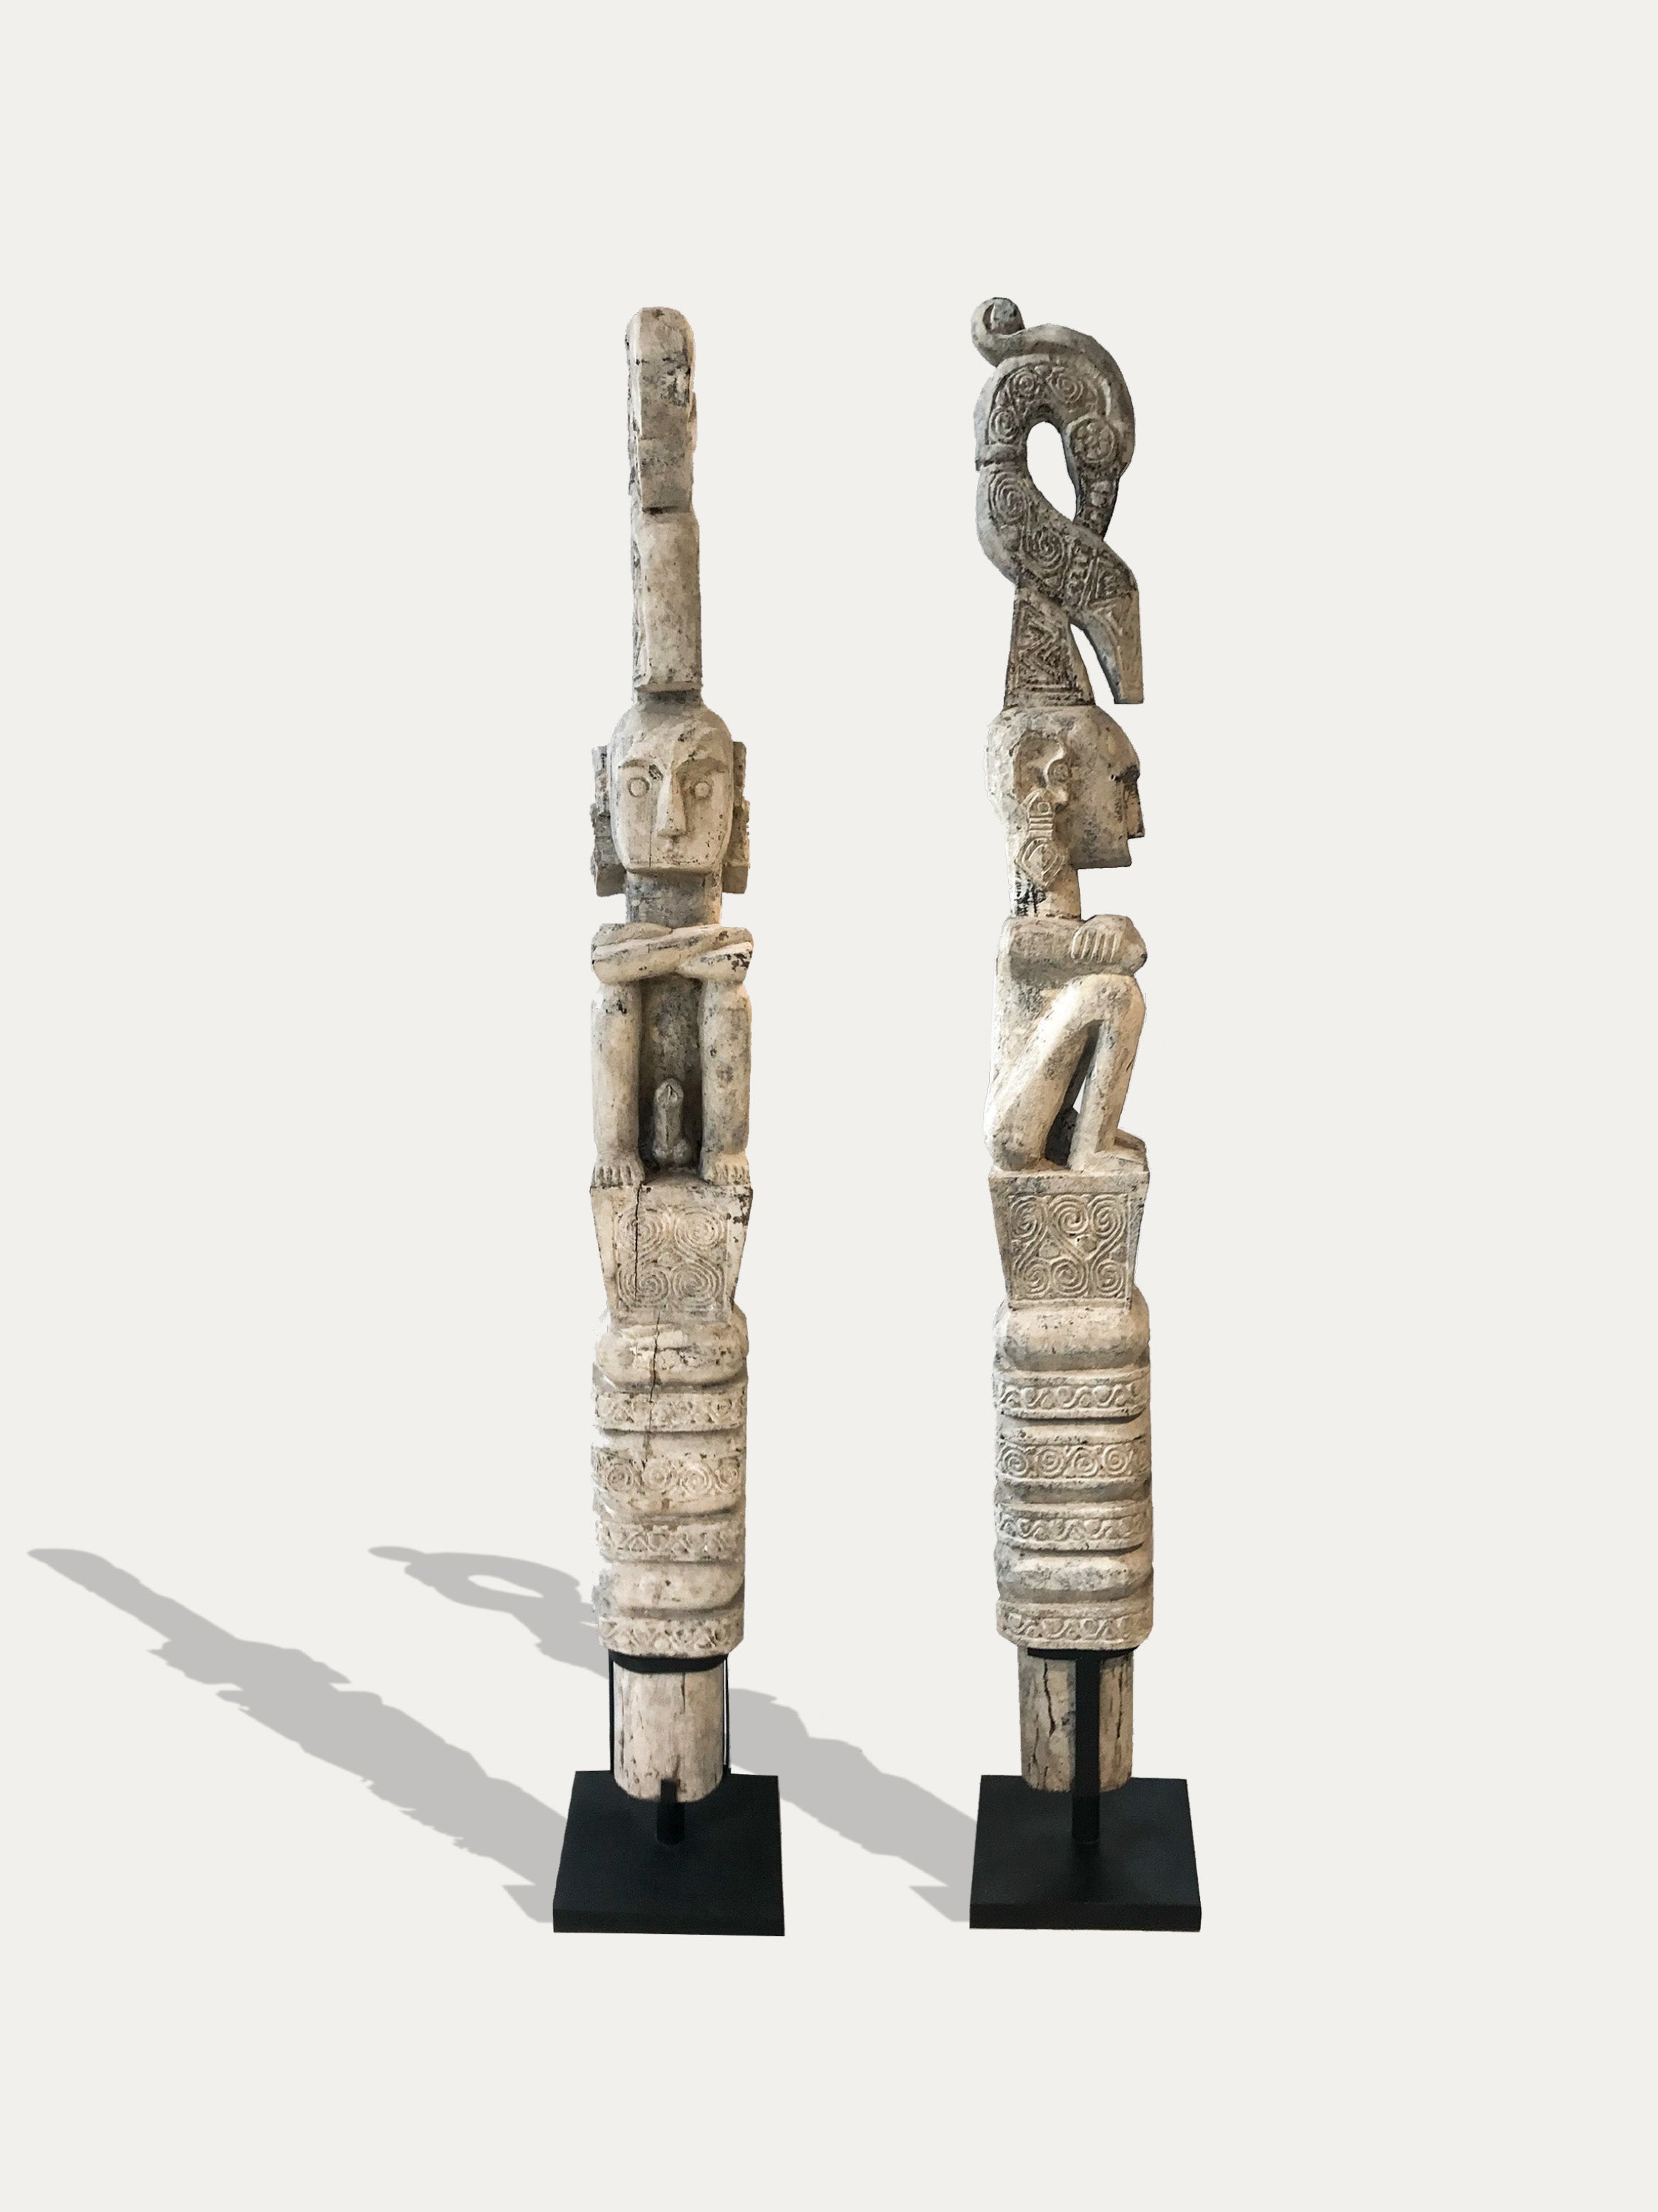 The King and Queen of Leti - Wooden Totems from Sumba - Asian Art from Kirschon